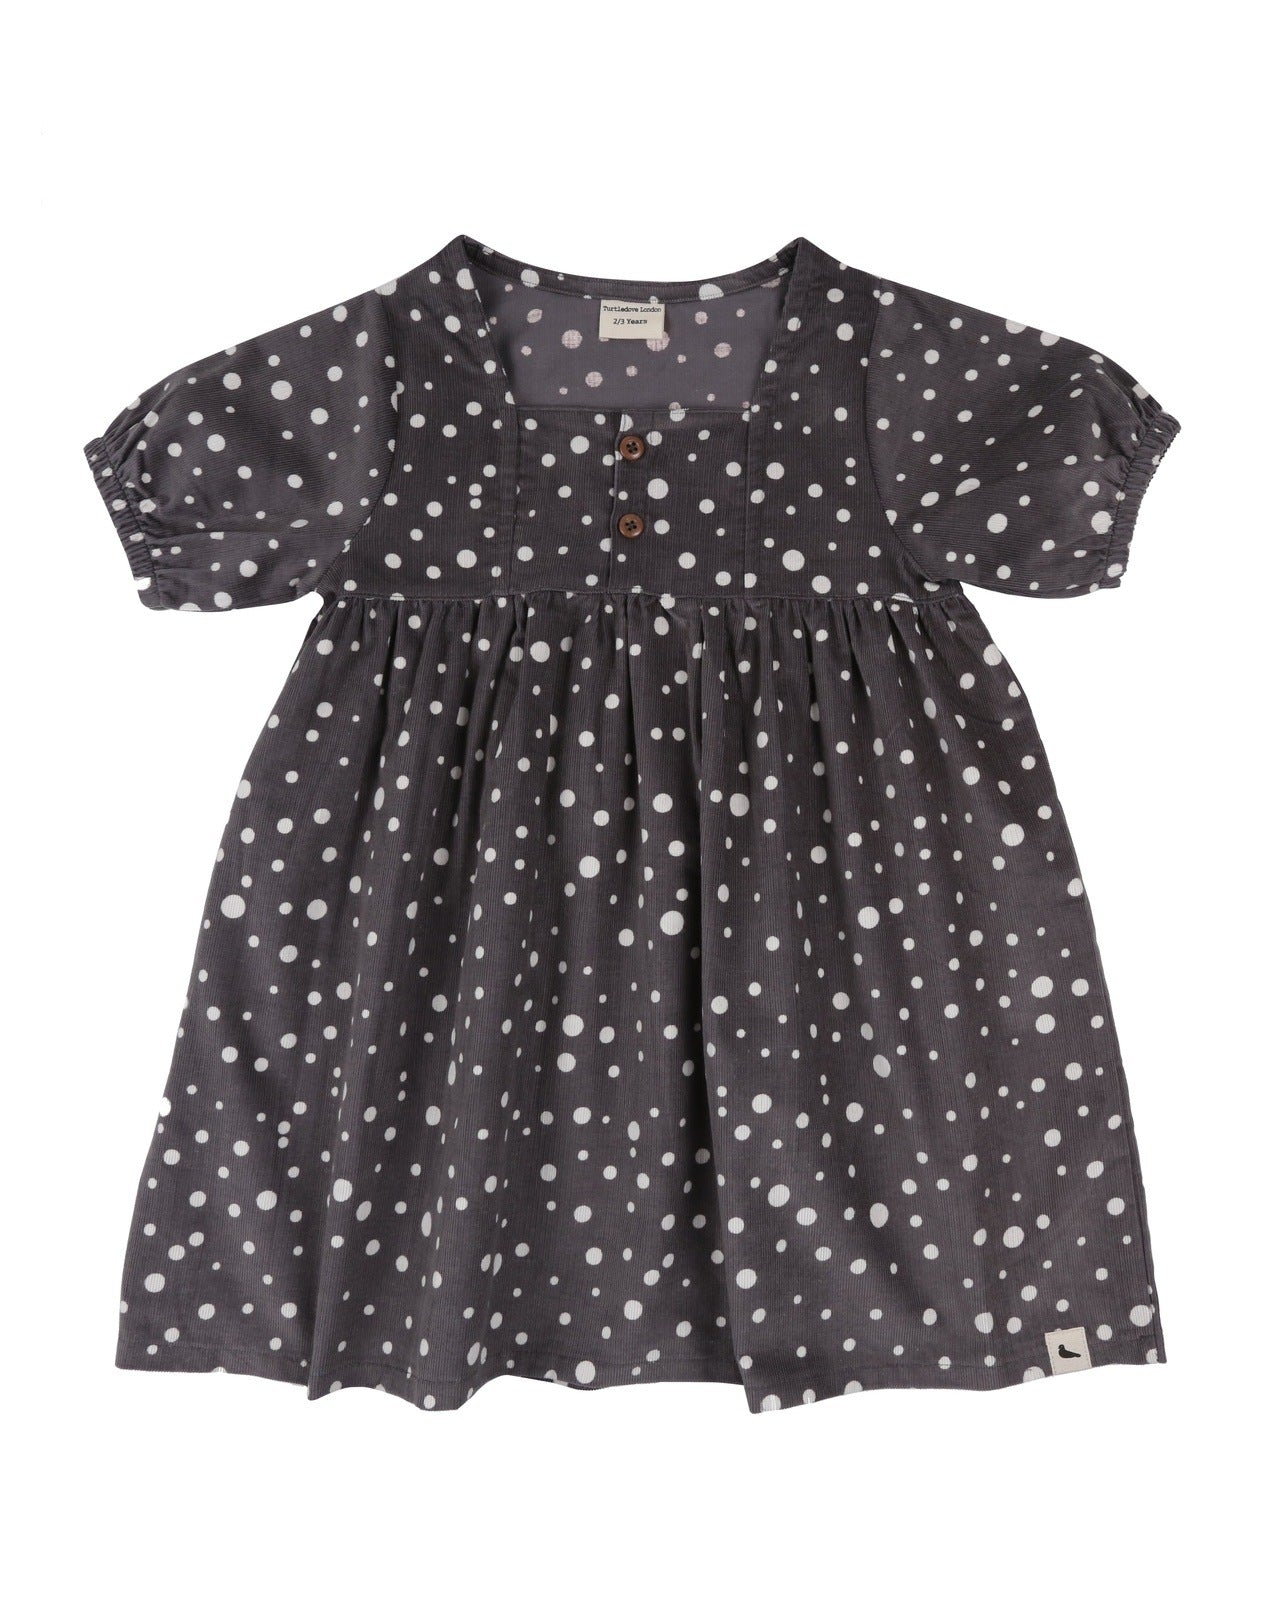 Load image into Gallery viewer, Girls Scatter Dot Print Cord Dress, Turtledove London, Turtledove Clothing, Girls Dresses, Children’s Clothing, Birthday Gift for Children, Nottinghamshire Independent Store, Turtledove Stockist
